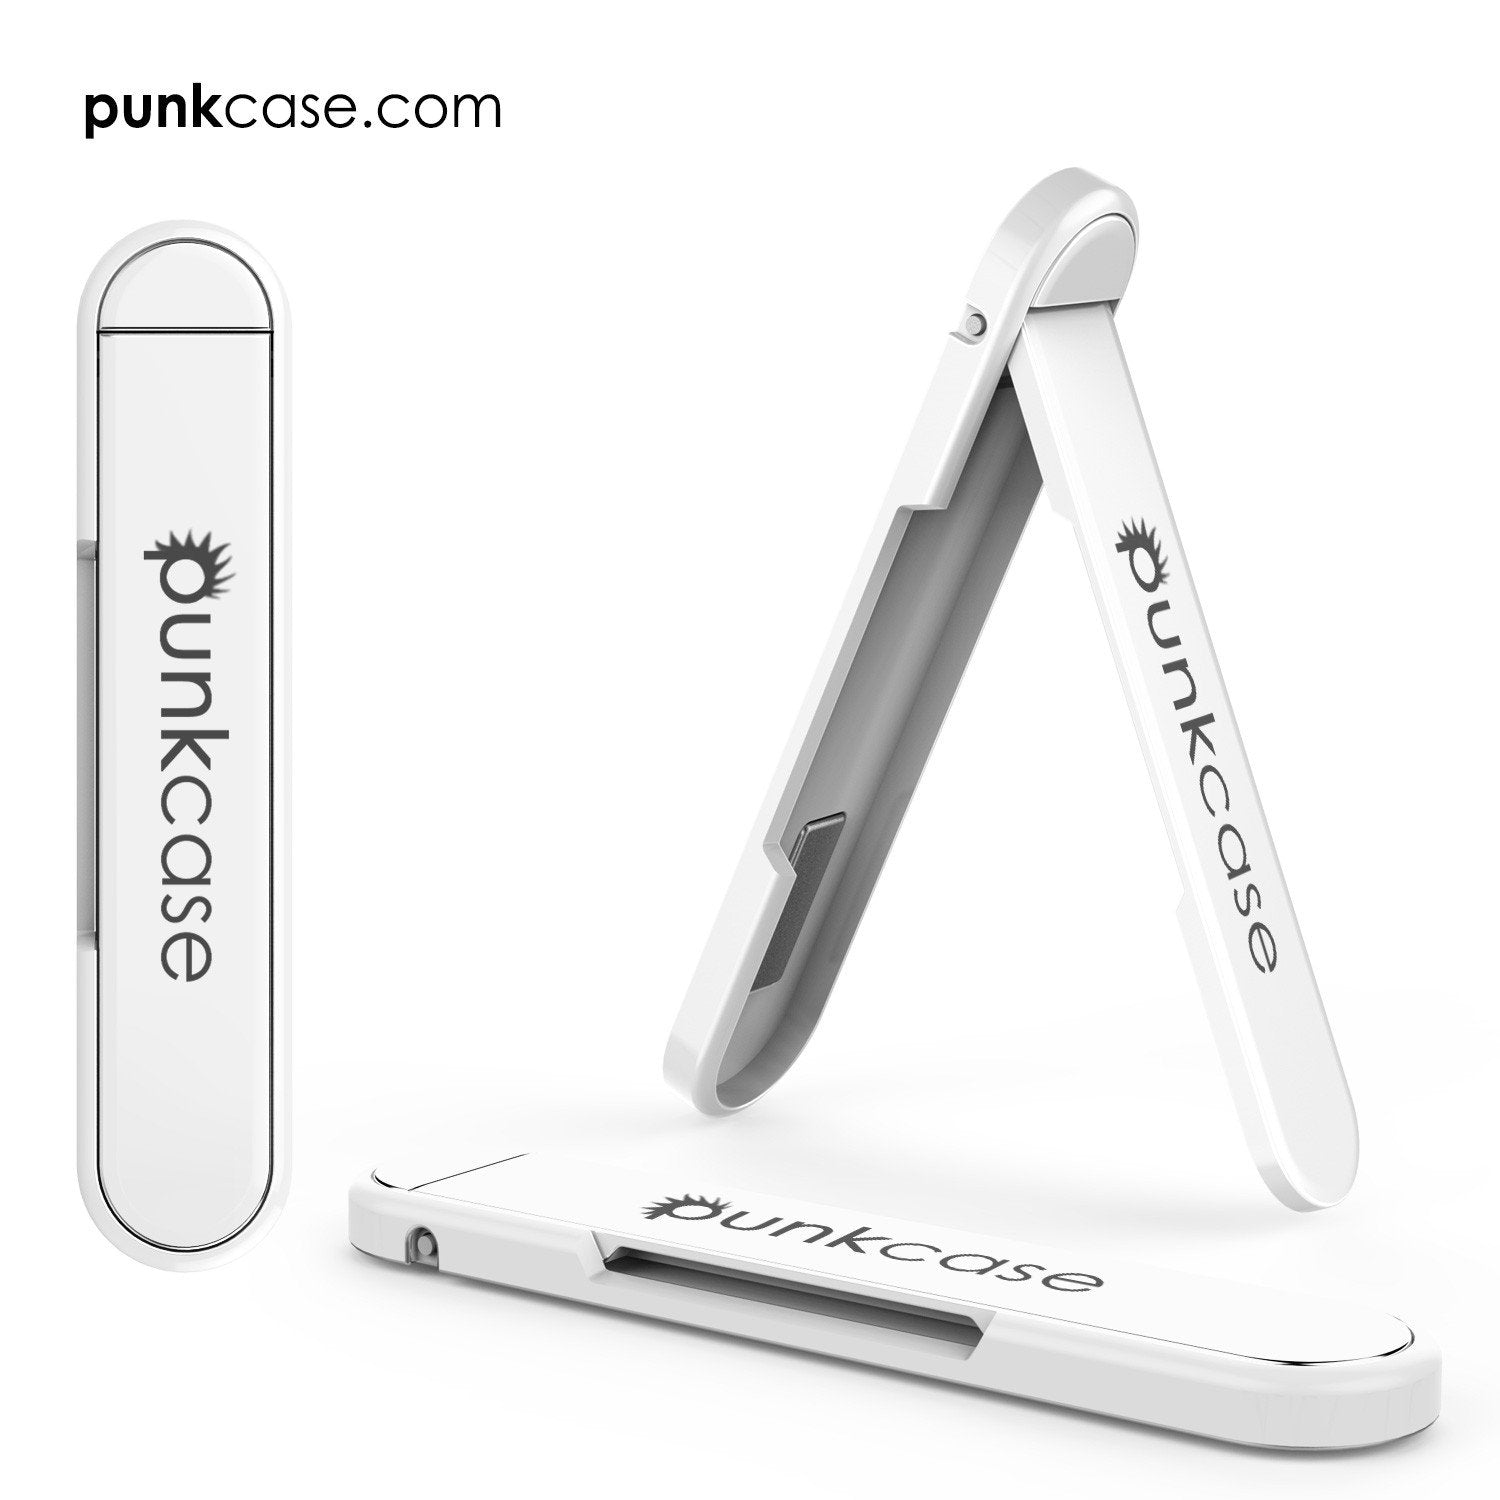 PUNKCASE FlickStick Universal Cell Phone Kickstand for all Mobile Phones & Cases with Flat Backs, One Finger Operation (White) - PunkCase NZ